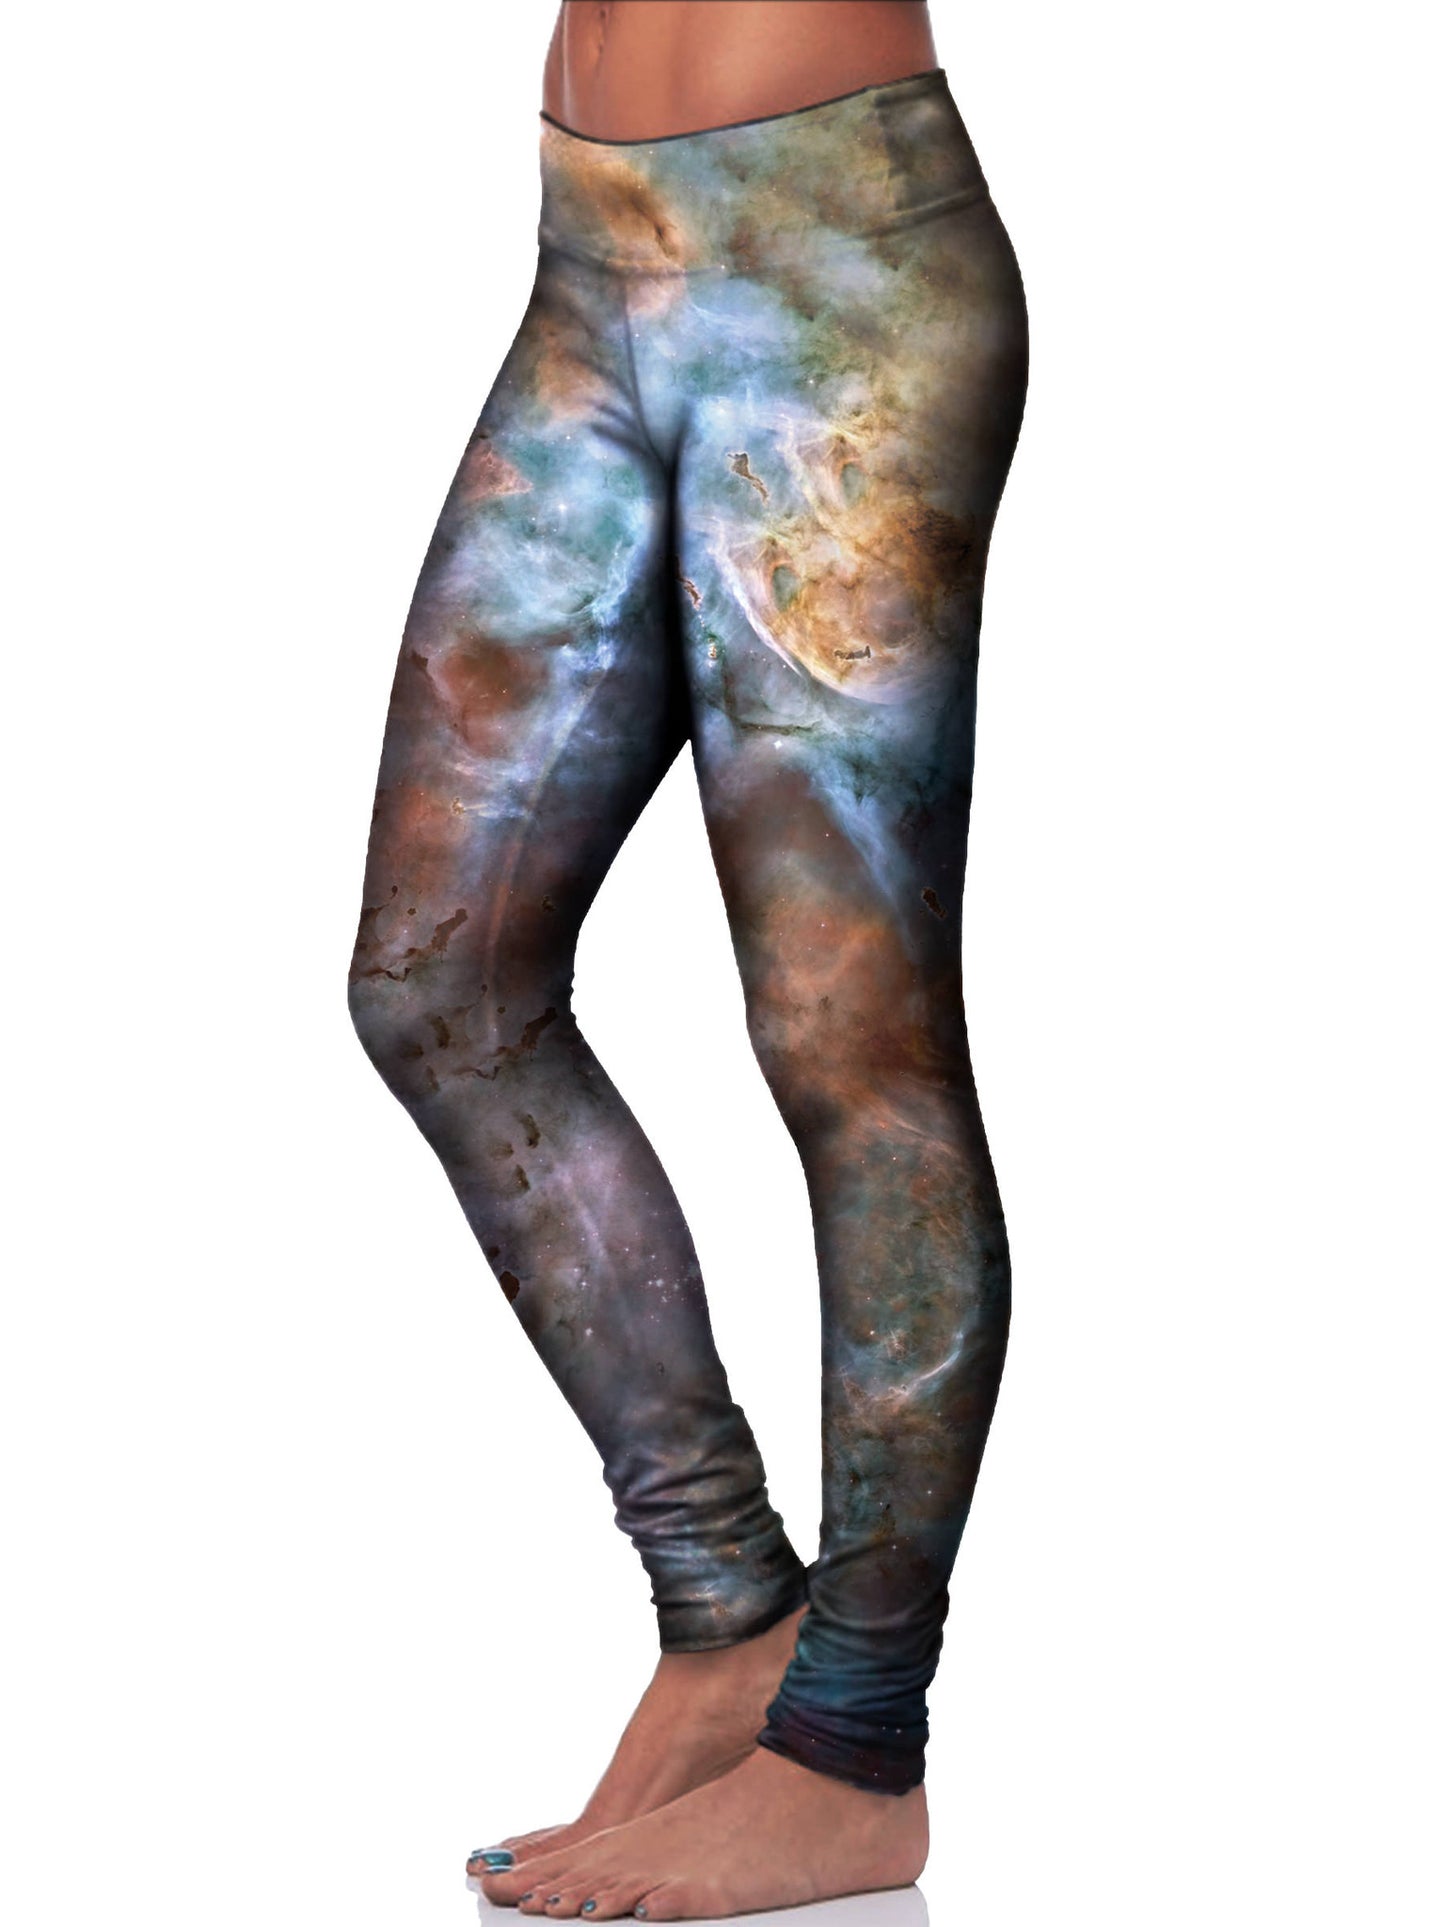 Abstracted Nebula Space Leggings - GratefullyDyed - 2